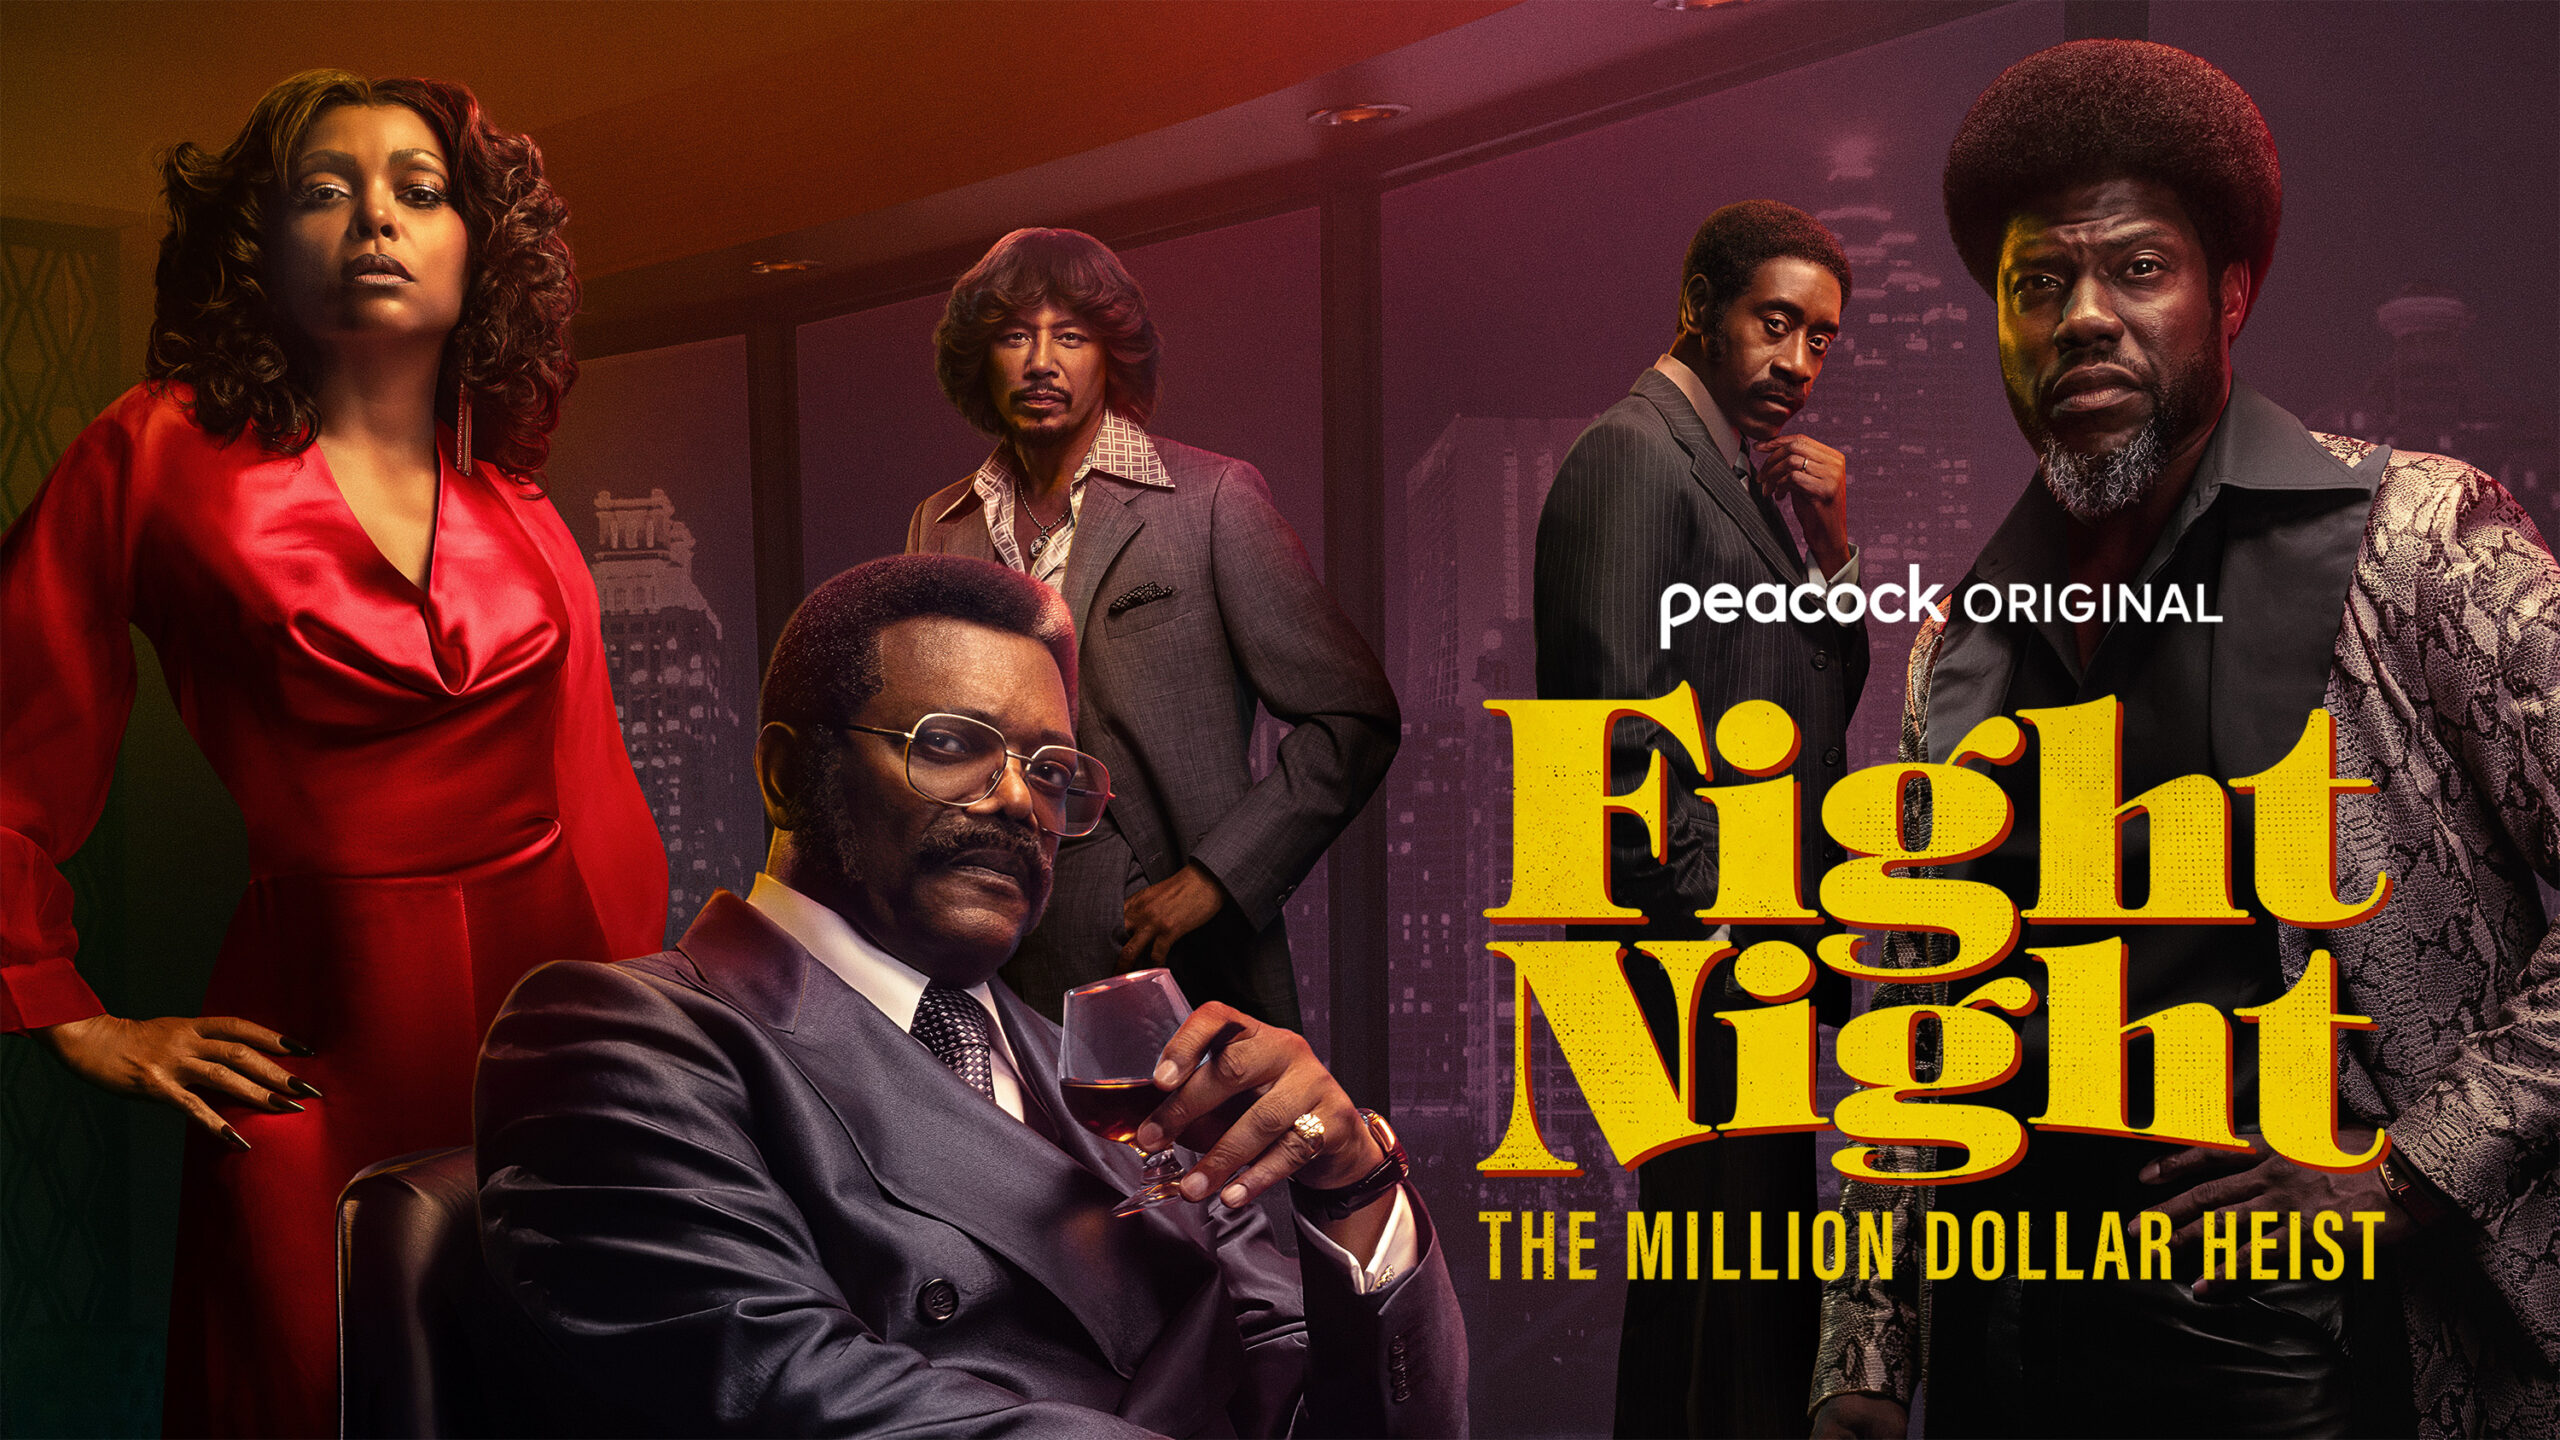 'Fight Night' Full Trailer: Starry Peacock Series With Kevin Hart, Samuel L. Jackson, Taraji P. Henson, Terrence Howard And More